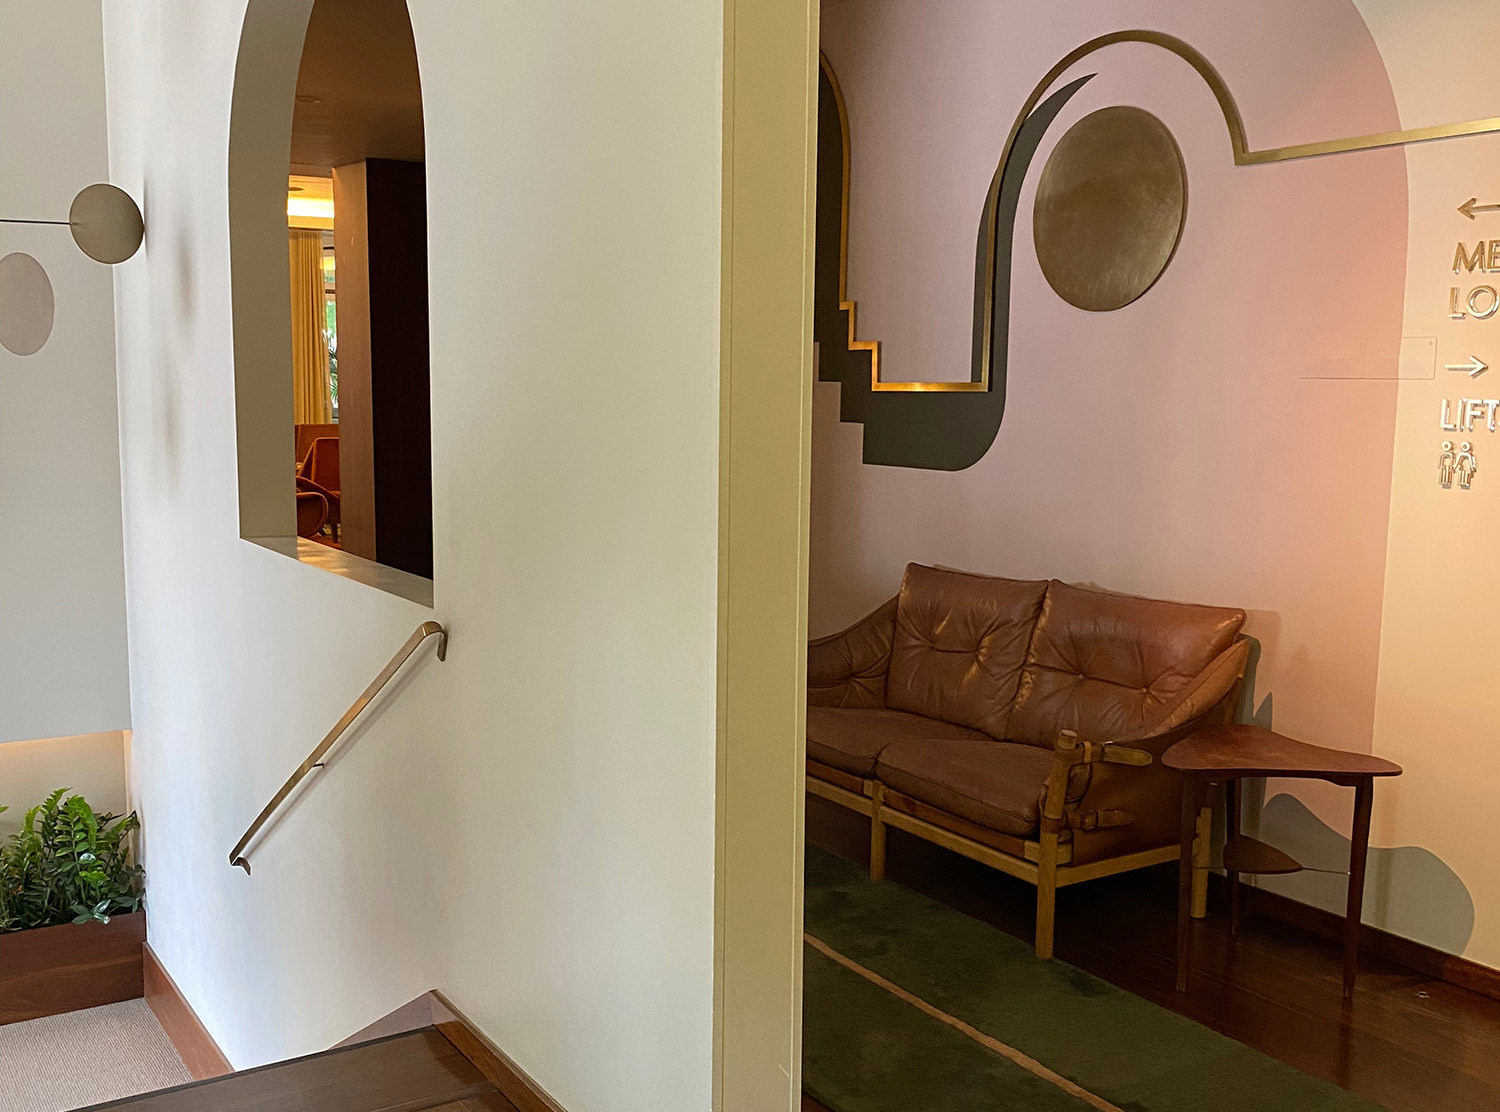 The Vintage Lisbon Hallway gives you the vibe of the hotel straight away